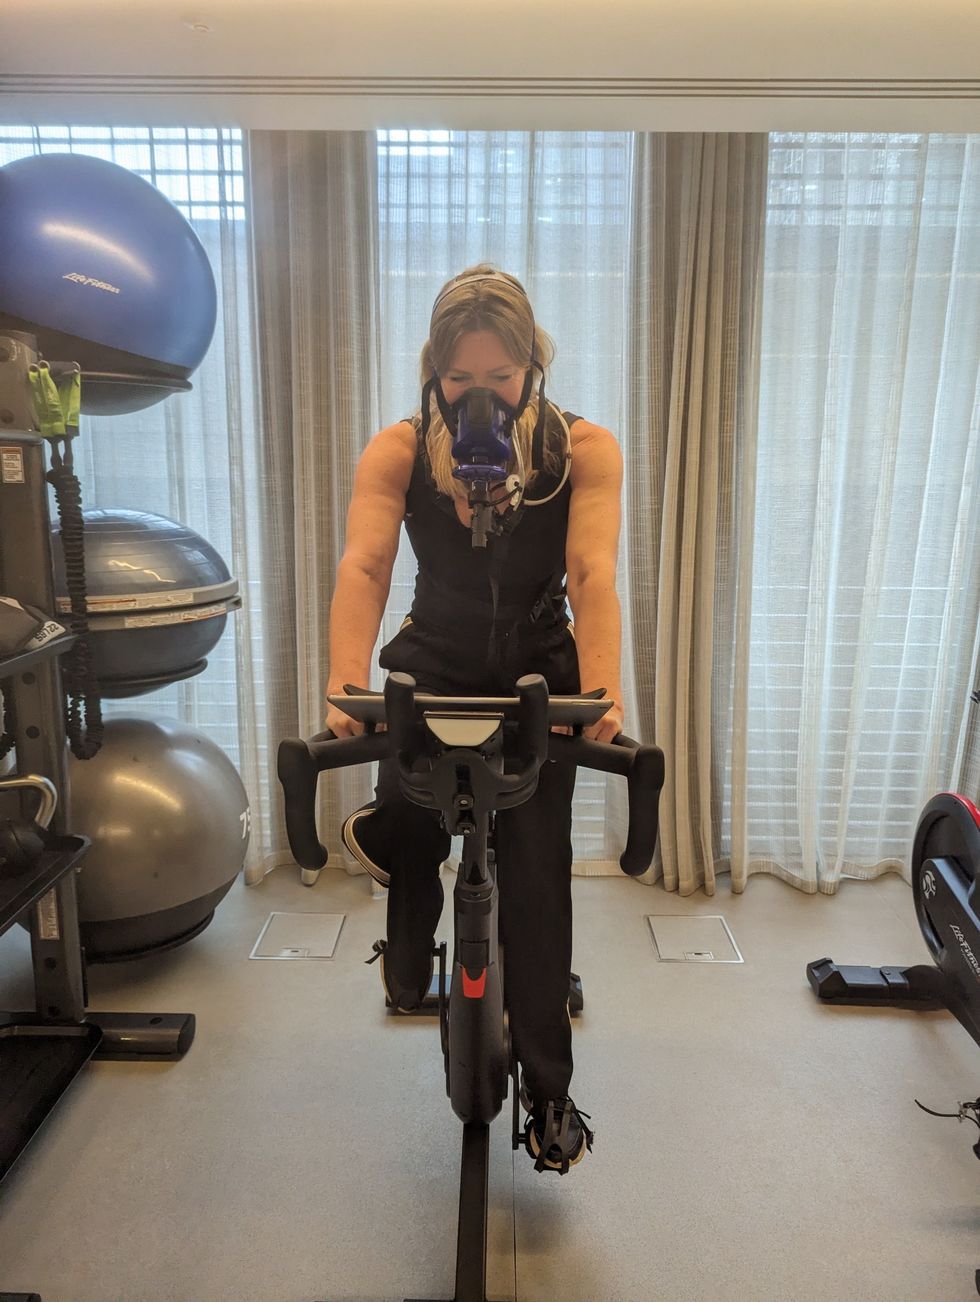 a person on a exercise bike